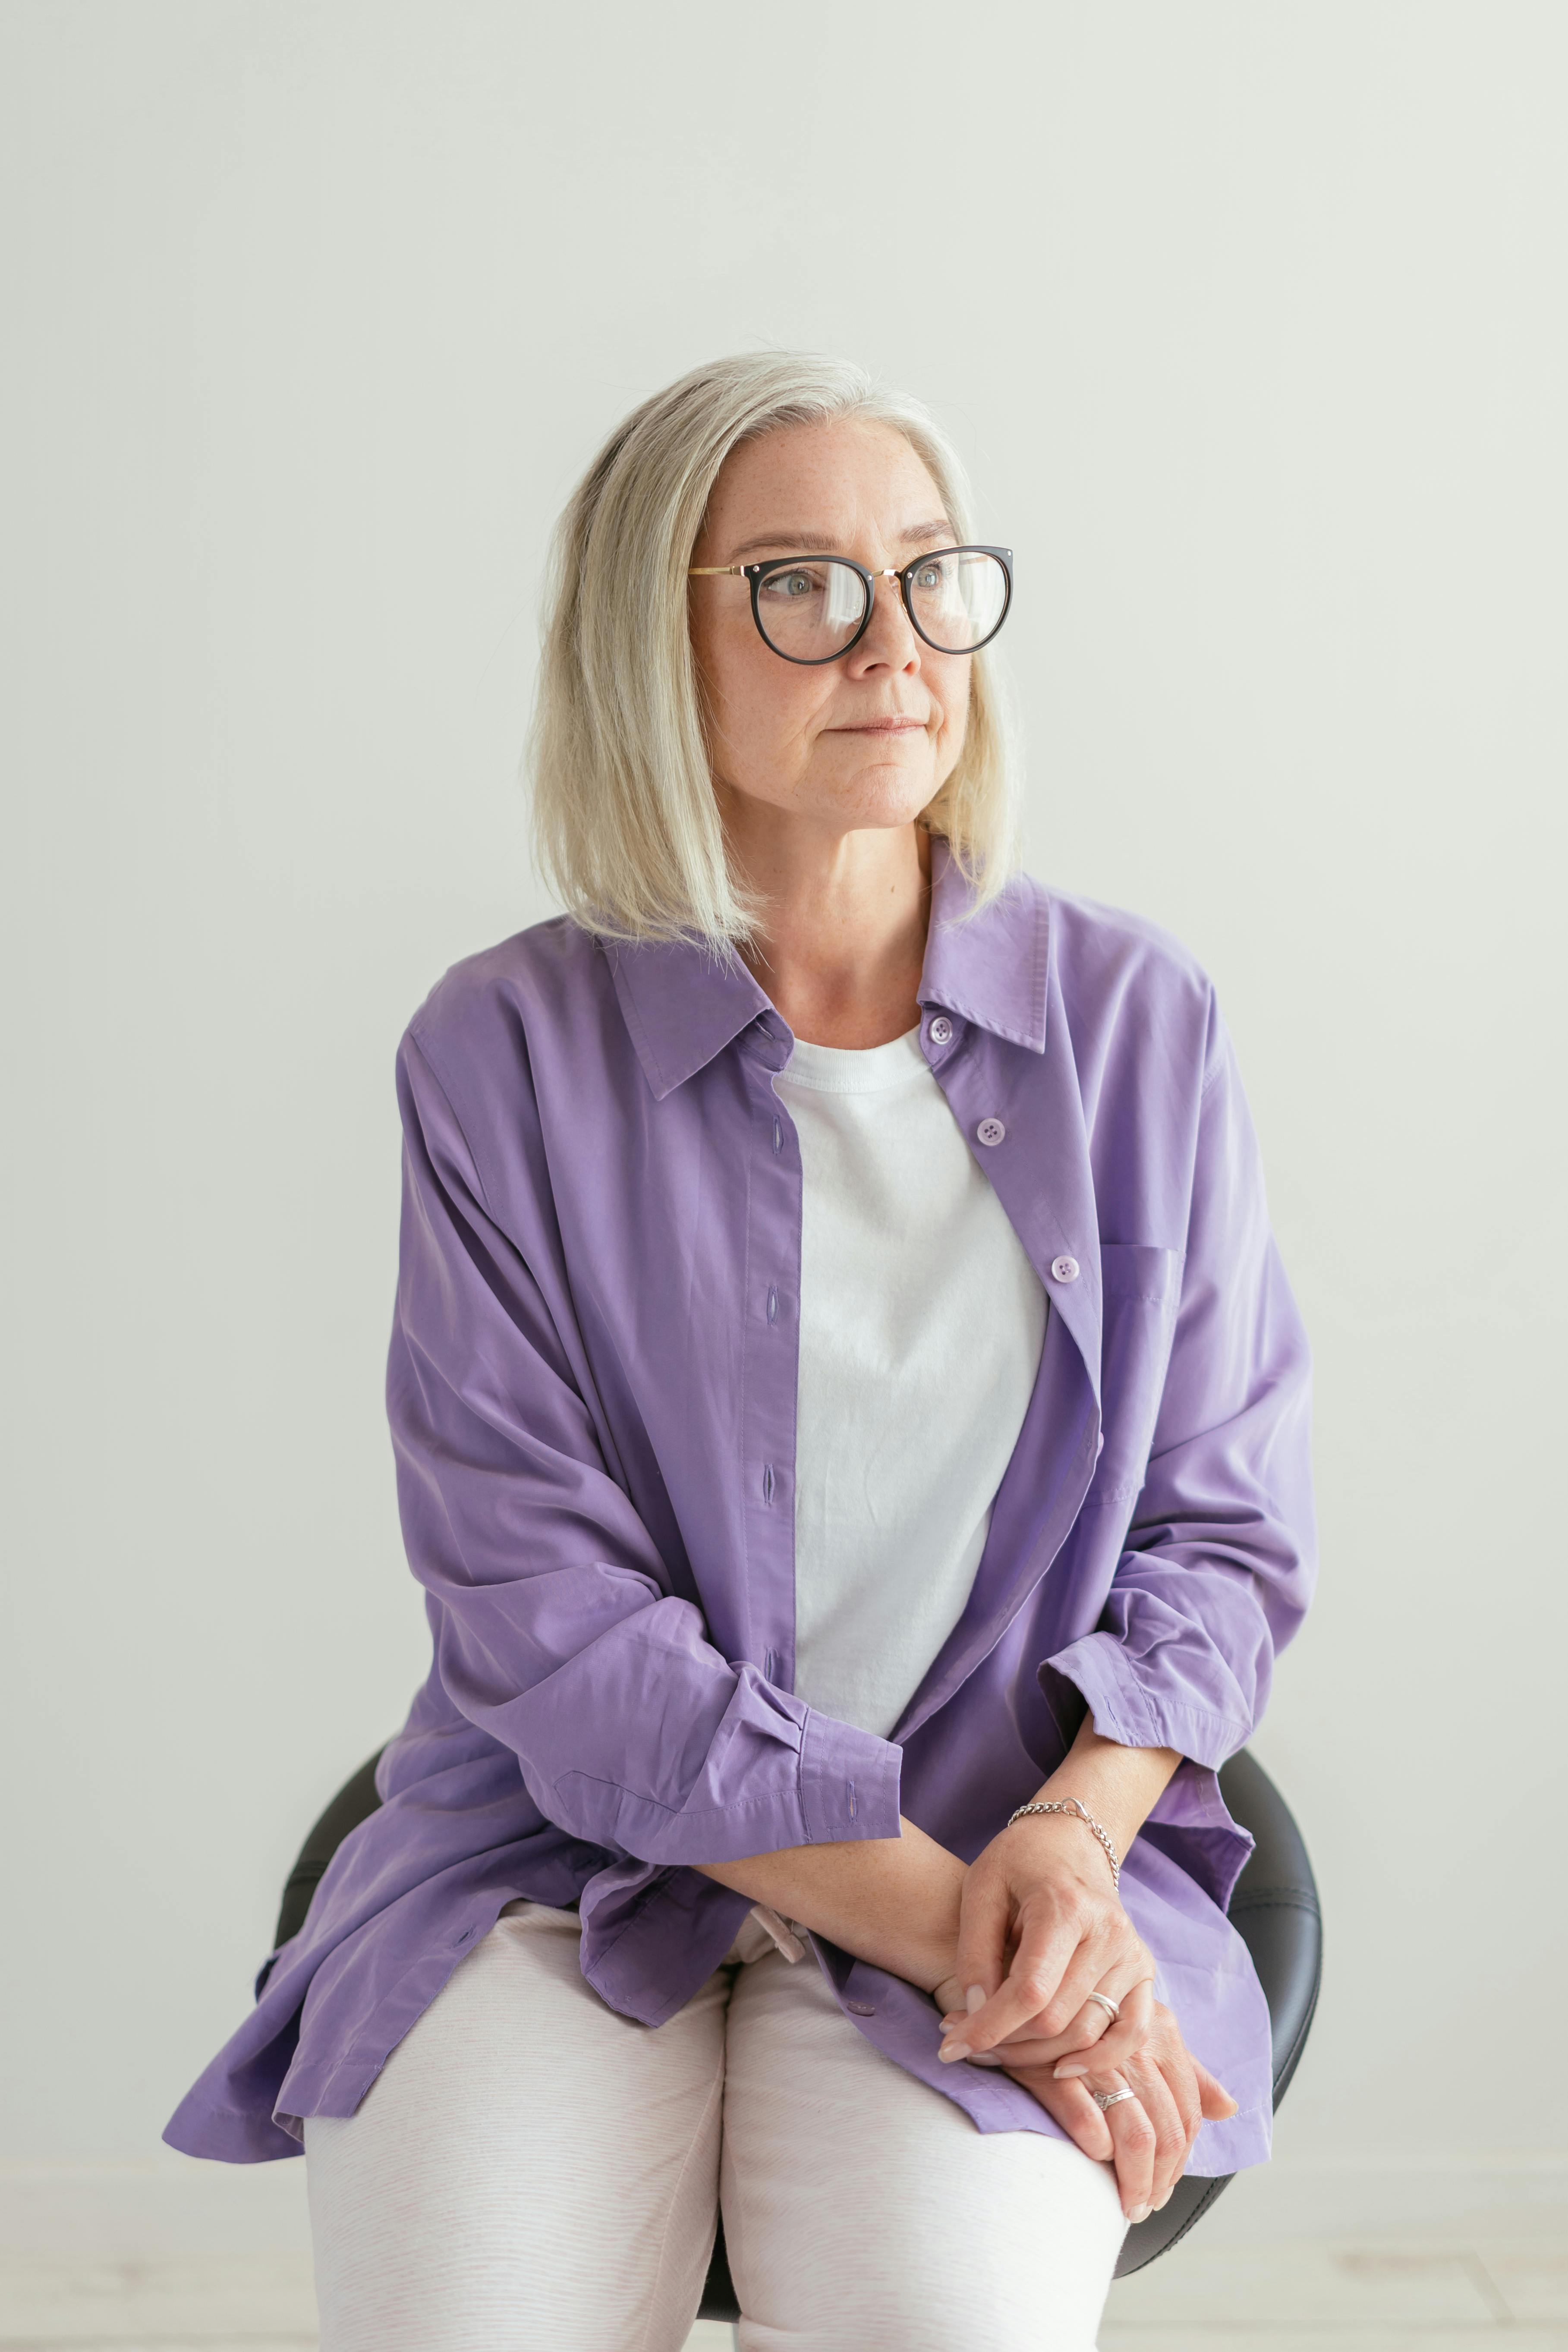 A serious-looking woman seated | Source: Pexels